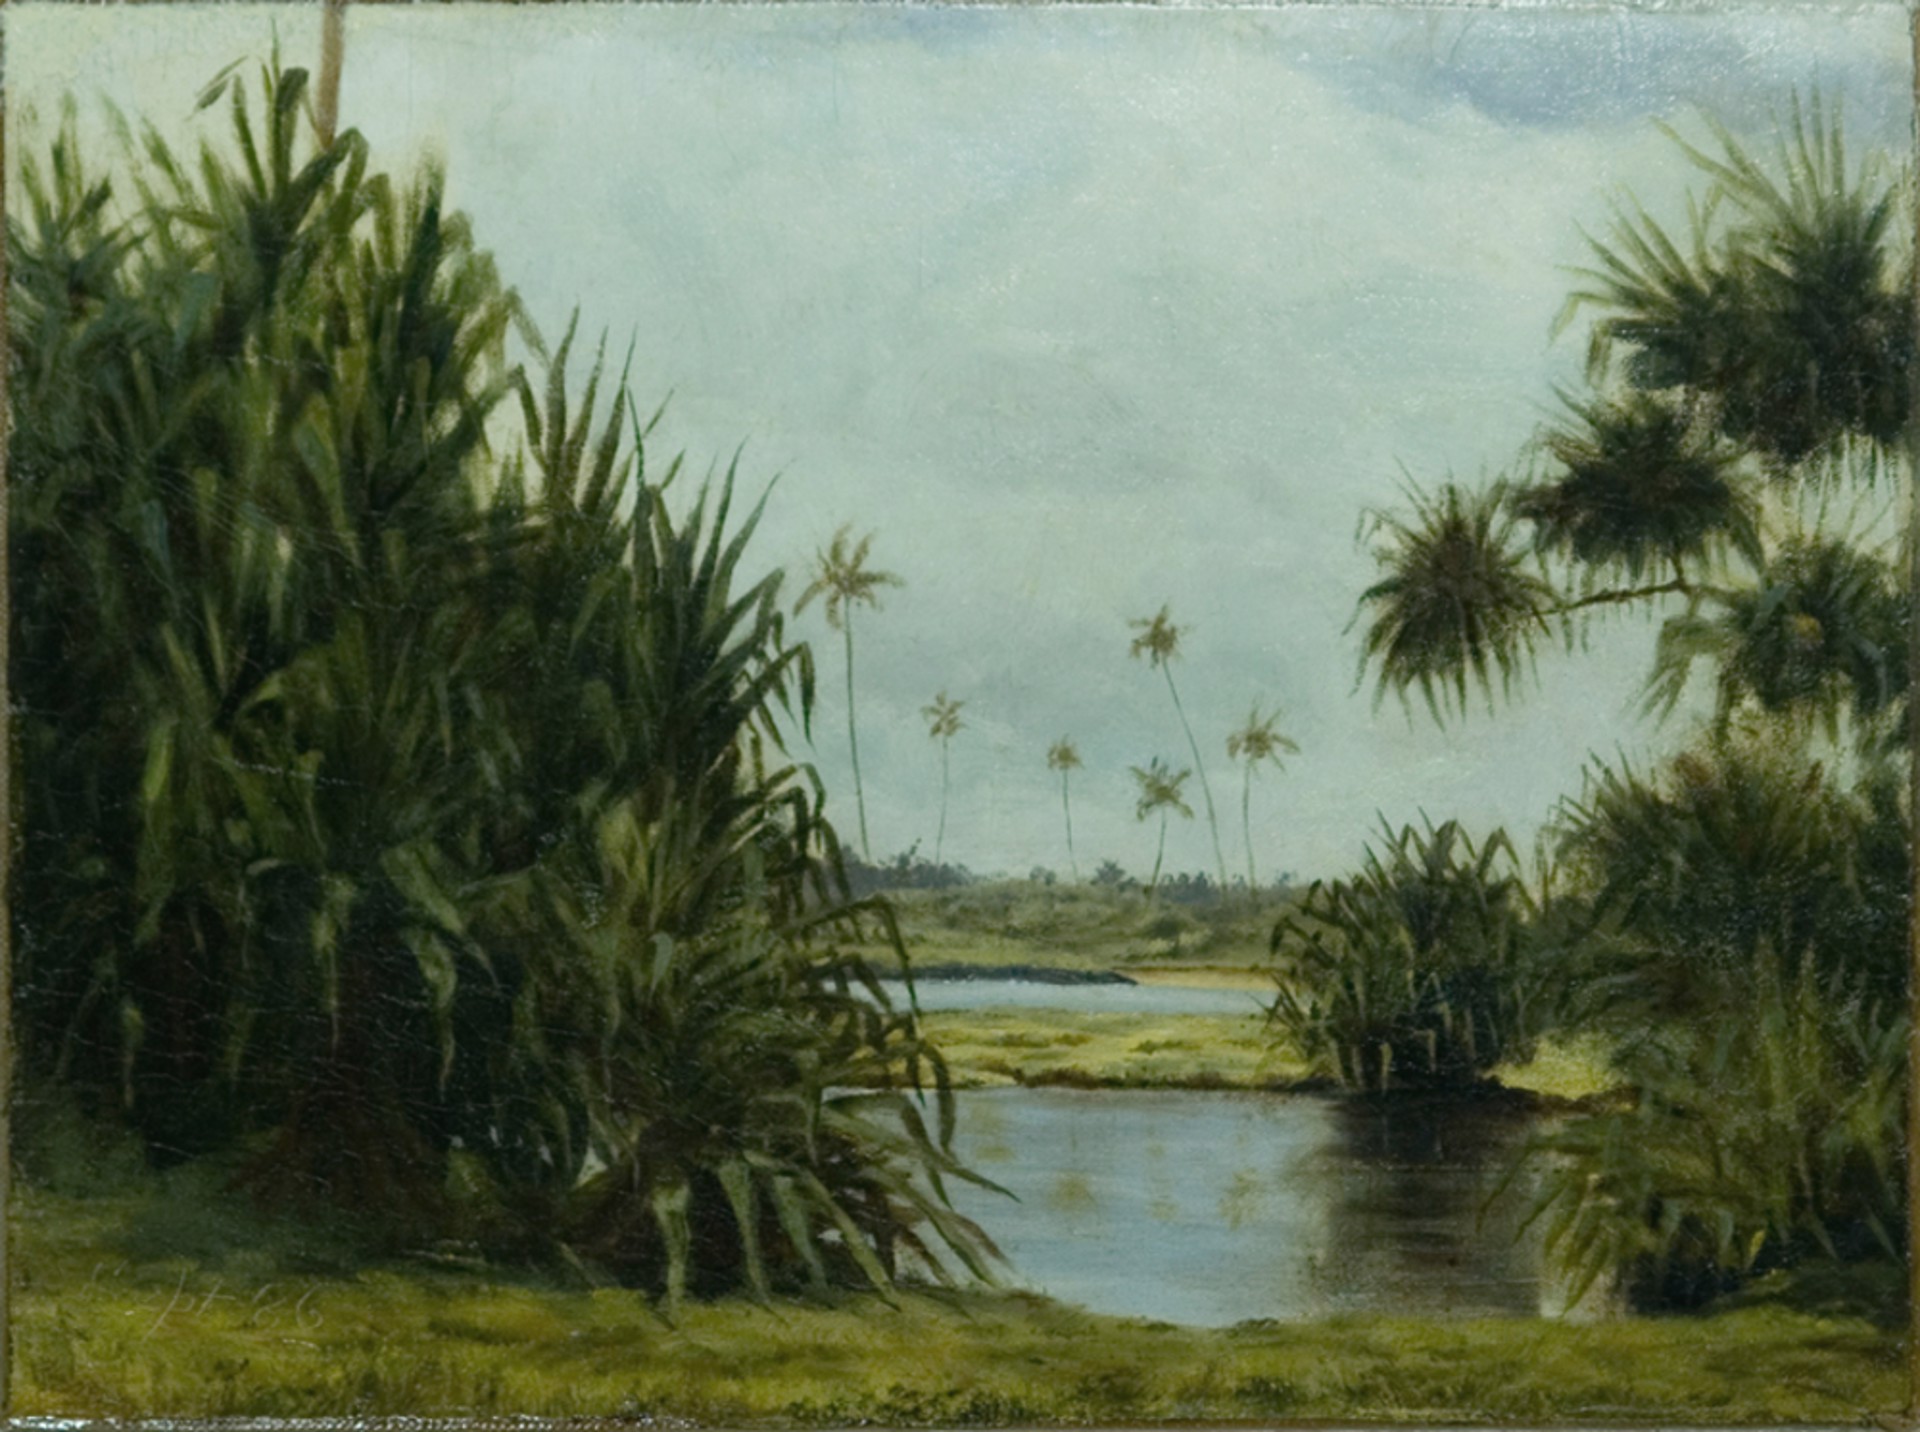 Hilo Bay, 1886 by D. Howard Hitchcock